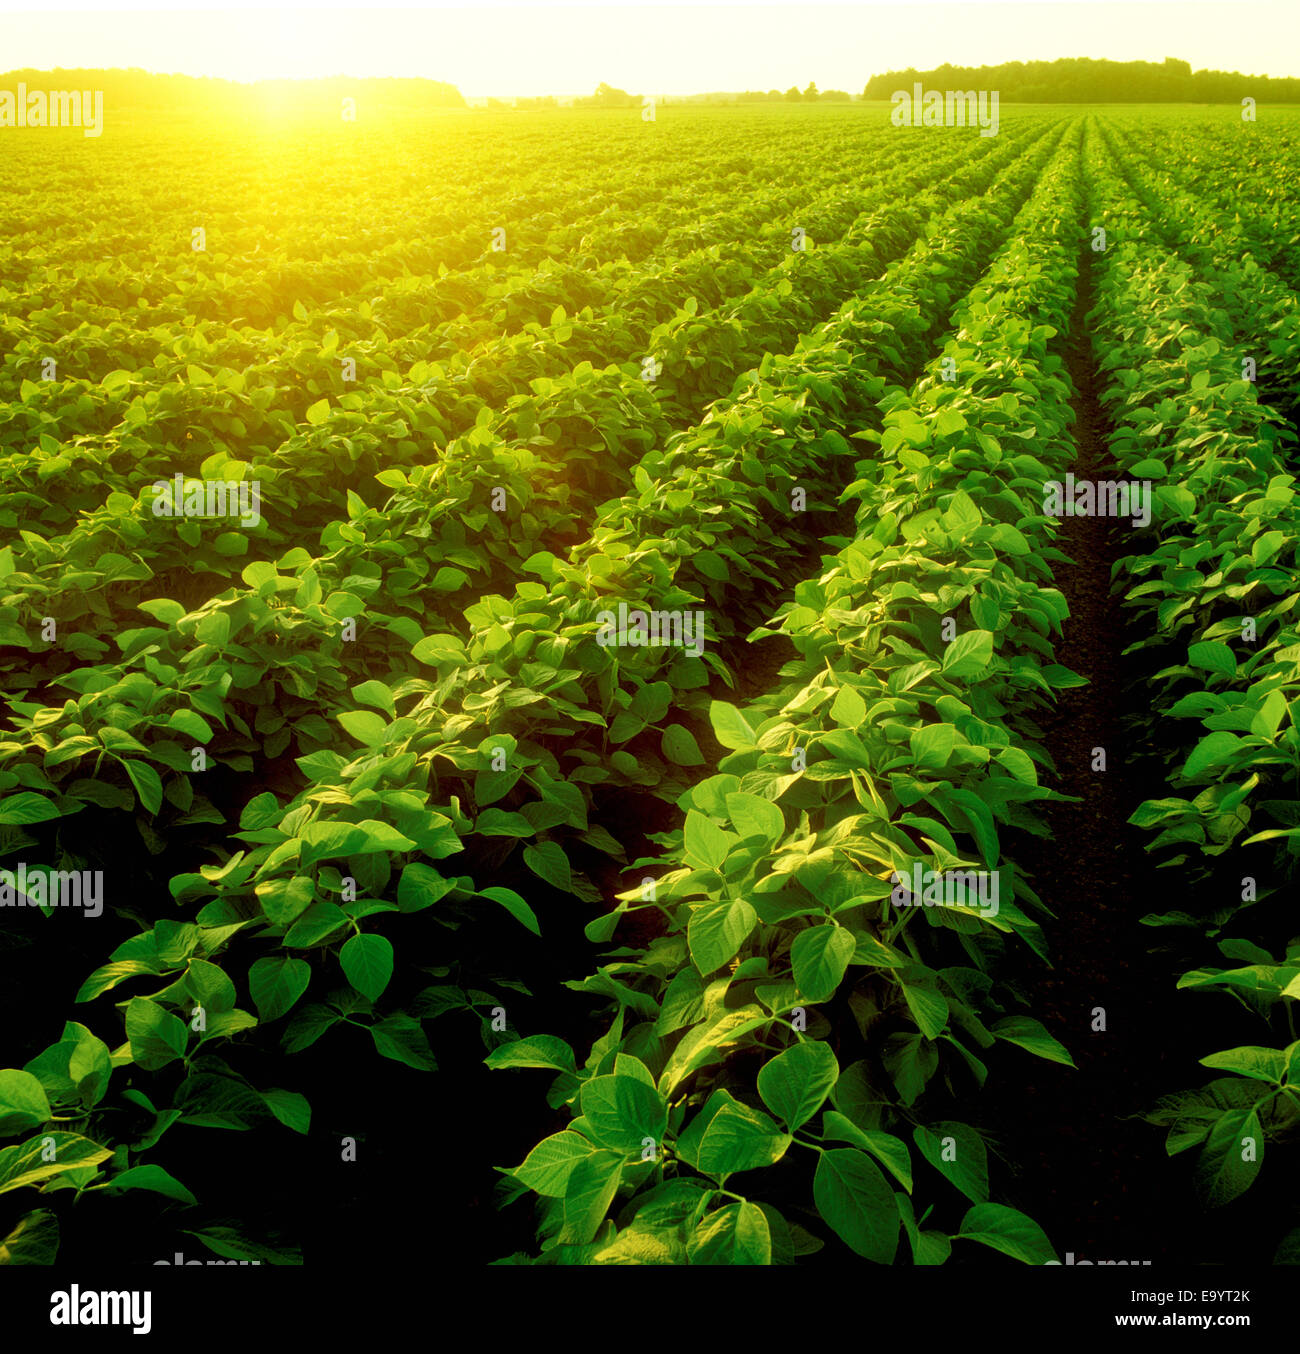 Agriculture - Field of mid growth soybeans backlit by late afternoon light / Ontario, Canada. Stock Photo